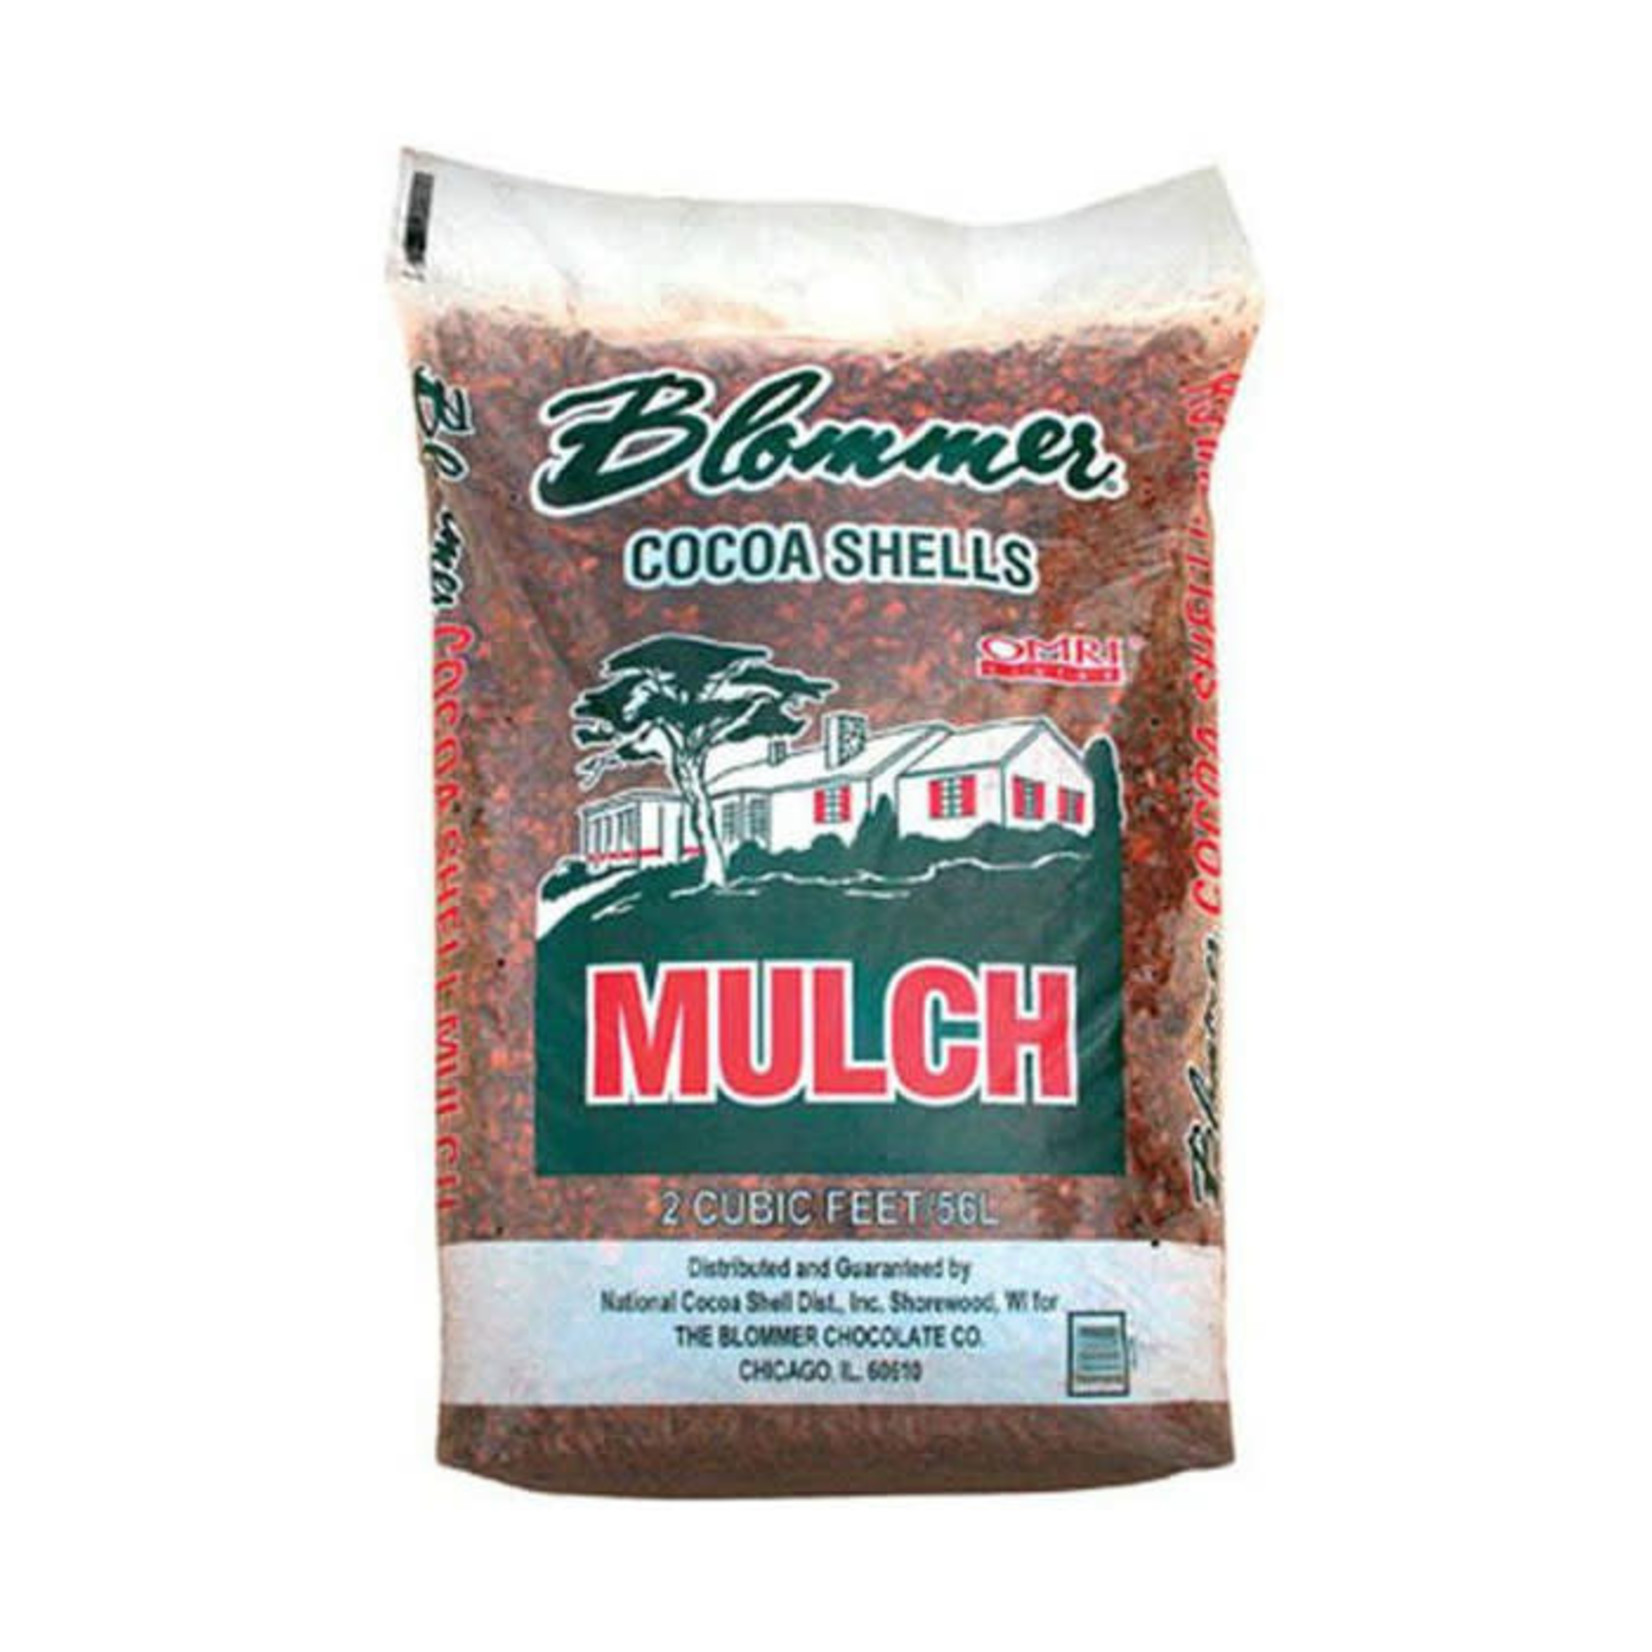 Blommer Cocoa Shell Mulch 2 cubic feet